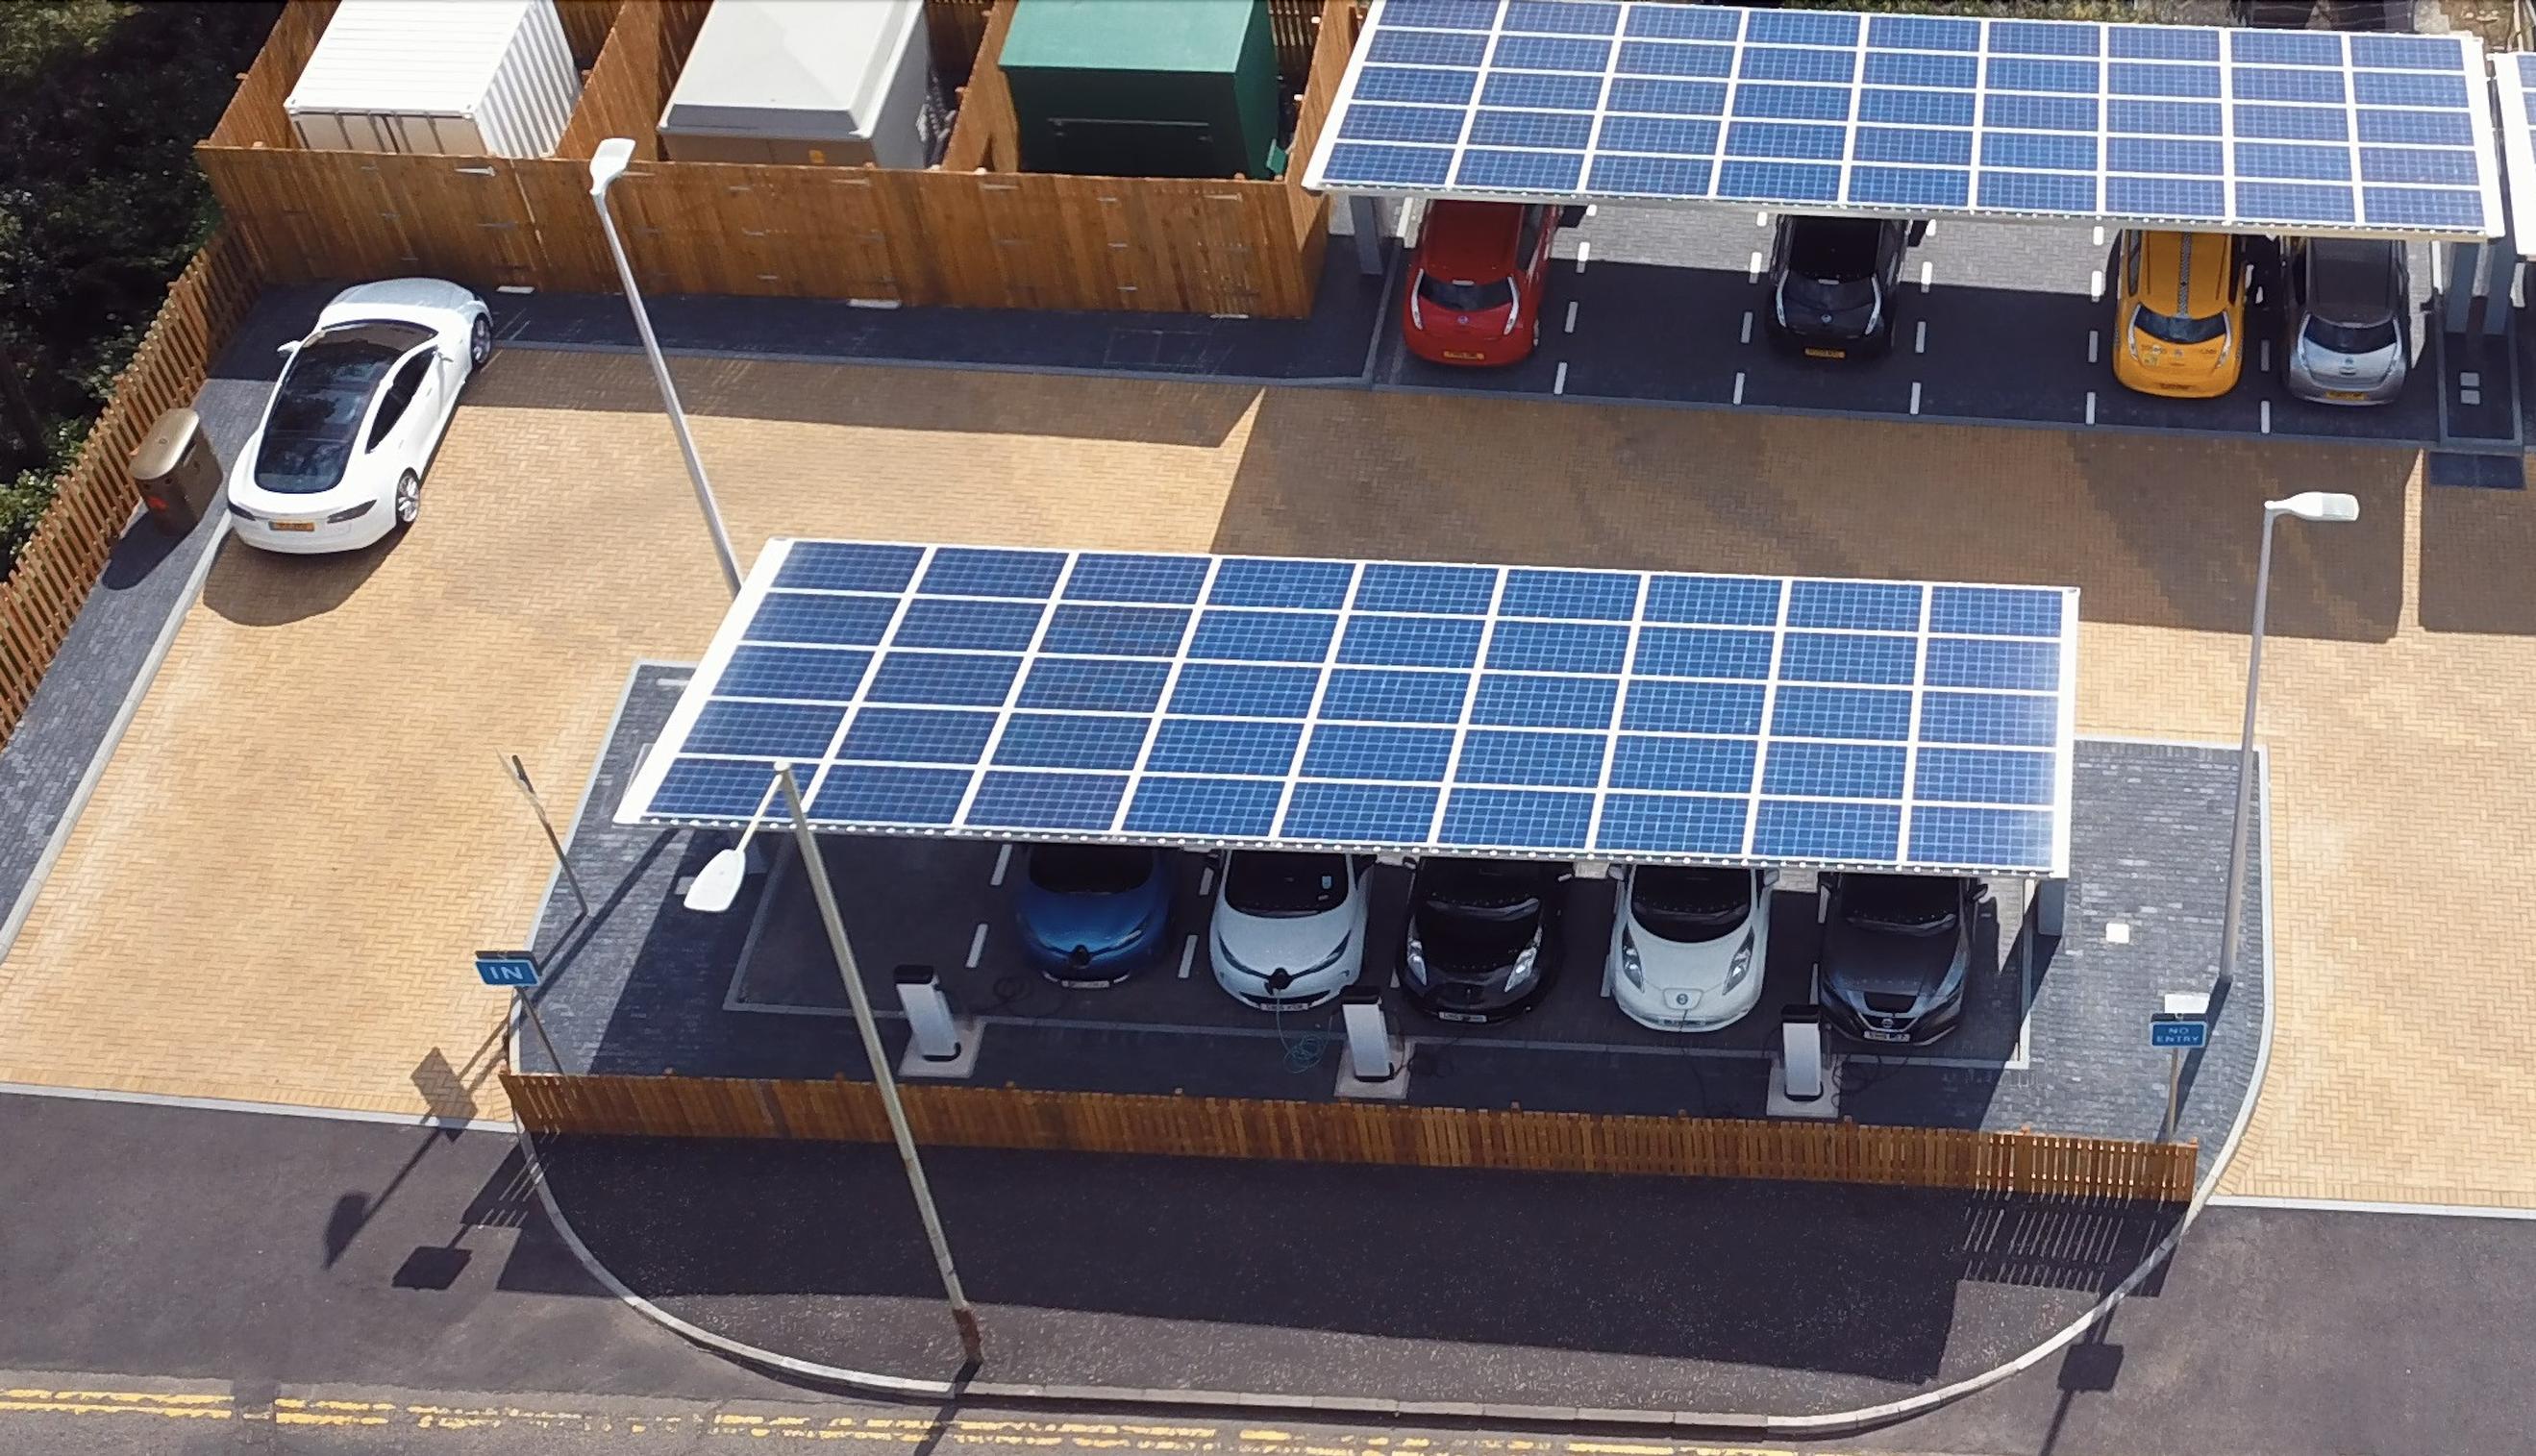 SWARCO Smart Charging taps into Connected Energy battery energy storage